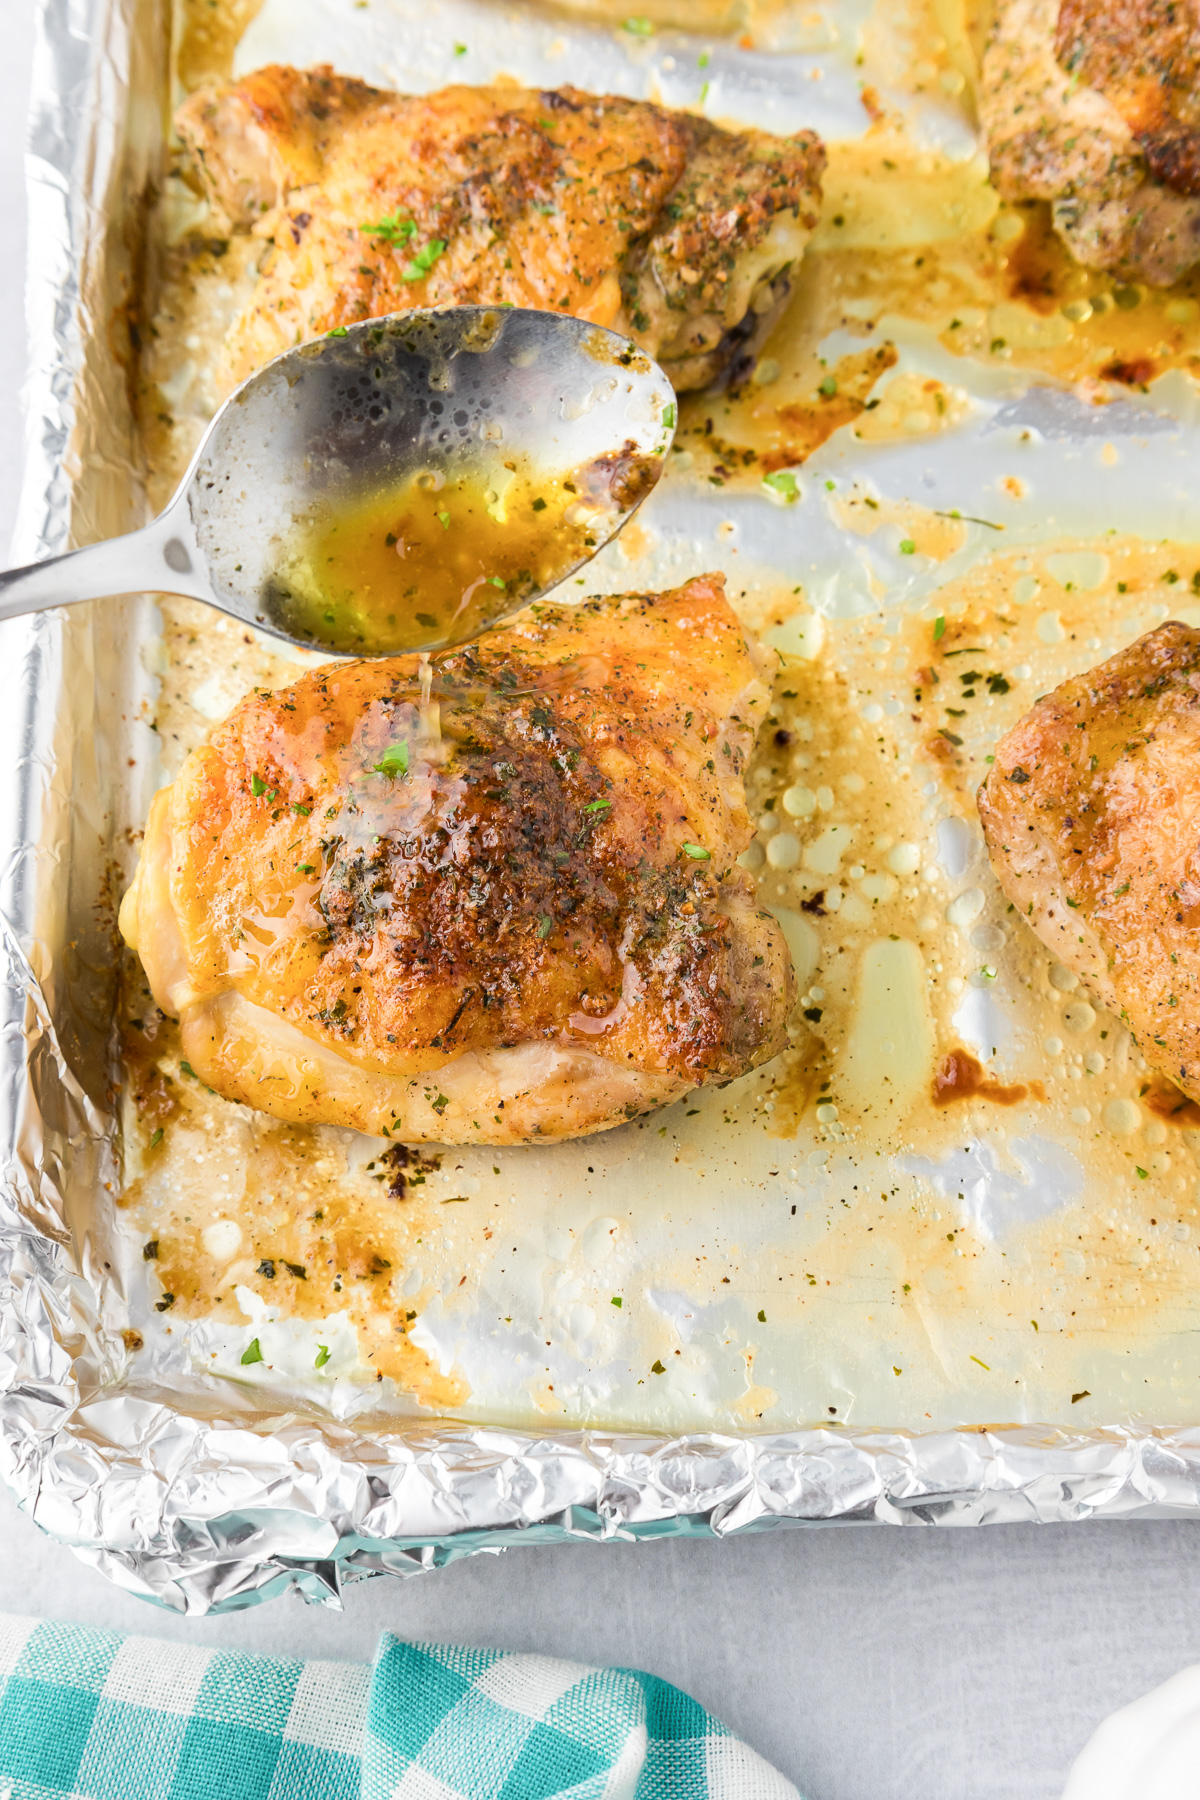 Baked crispy ranch chicken thighs on a foil-lined tray being basted with juices from the pan using a spoon.